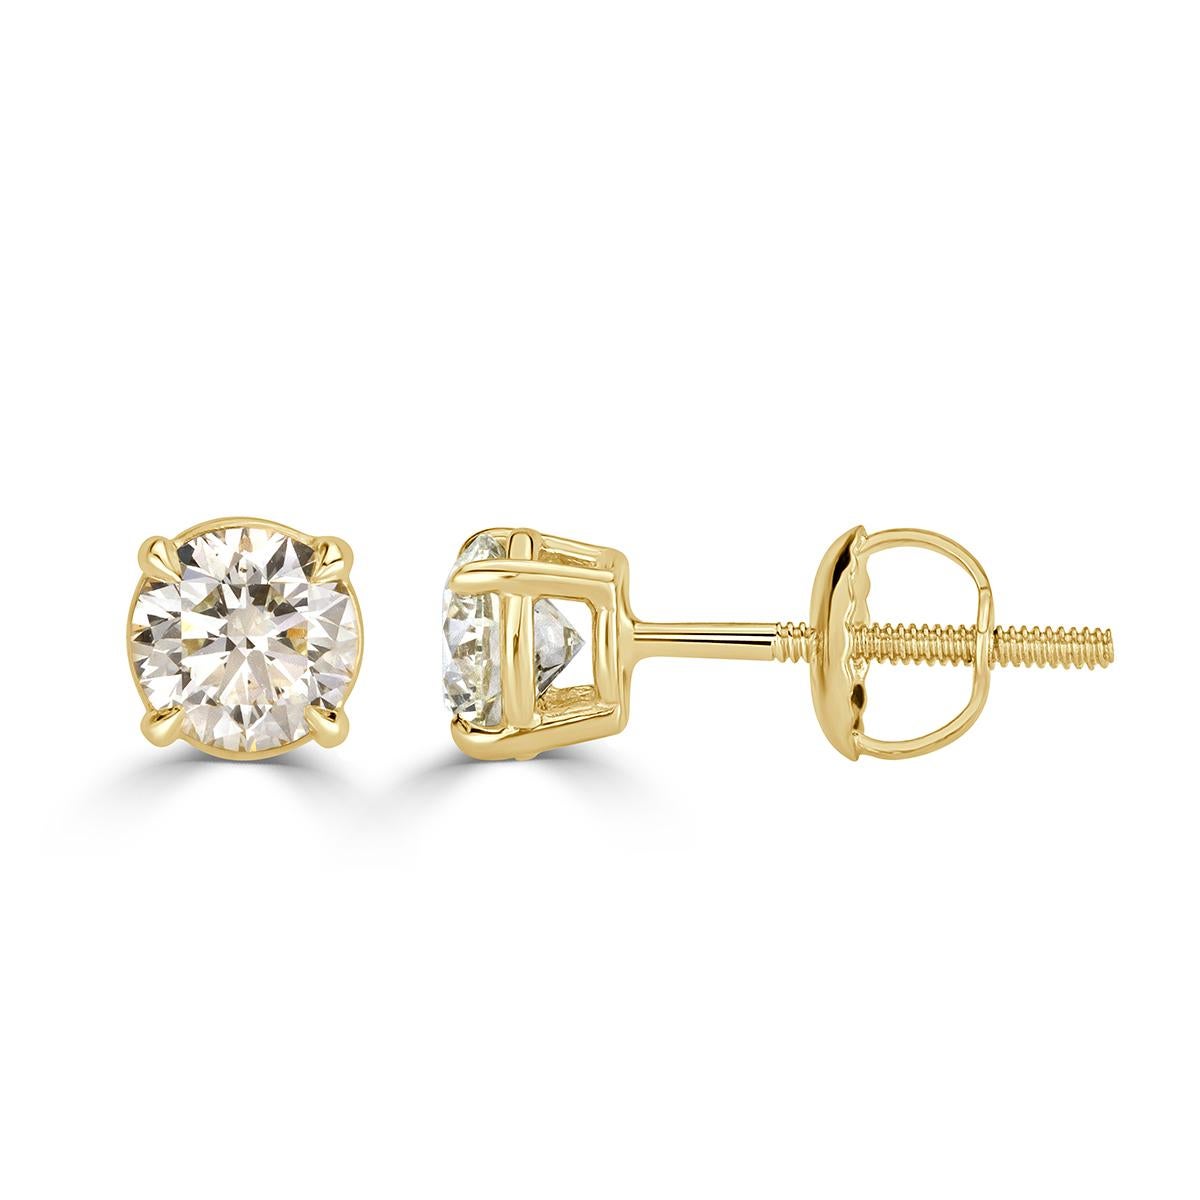 This superb pair of diamond stud earrings features two round brilliant cut diamonds with a total carat weight of 1.00ct. They are graded at G-H in color, SI1-SI2 in clarity and bezel set to perfection in 14k yellow gold. 
